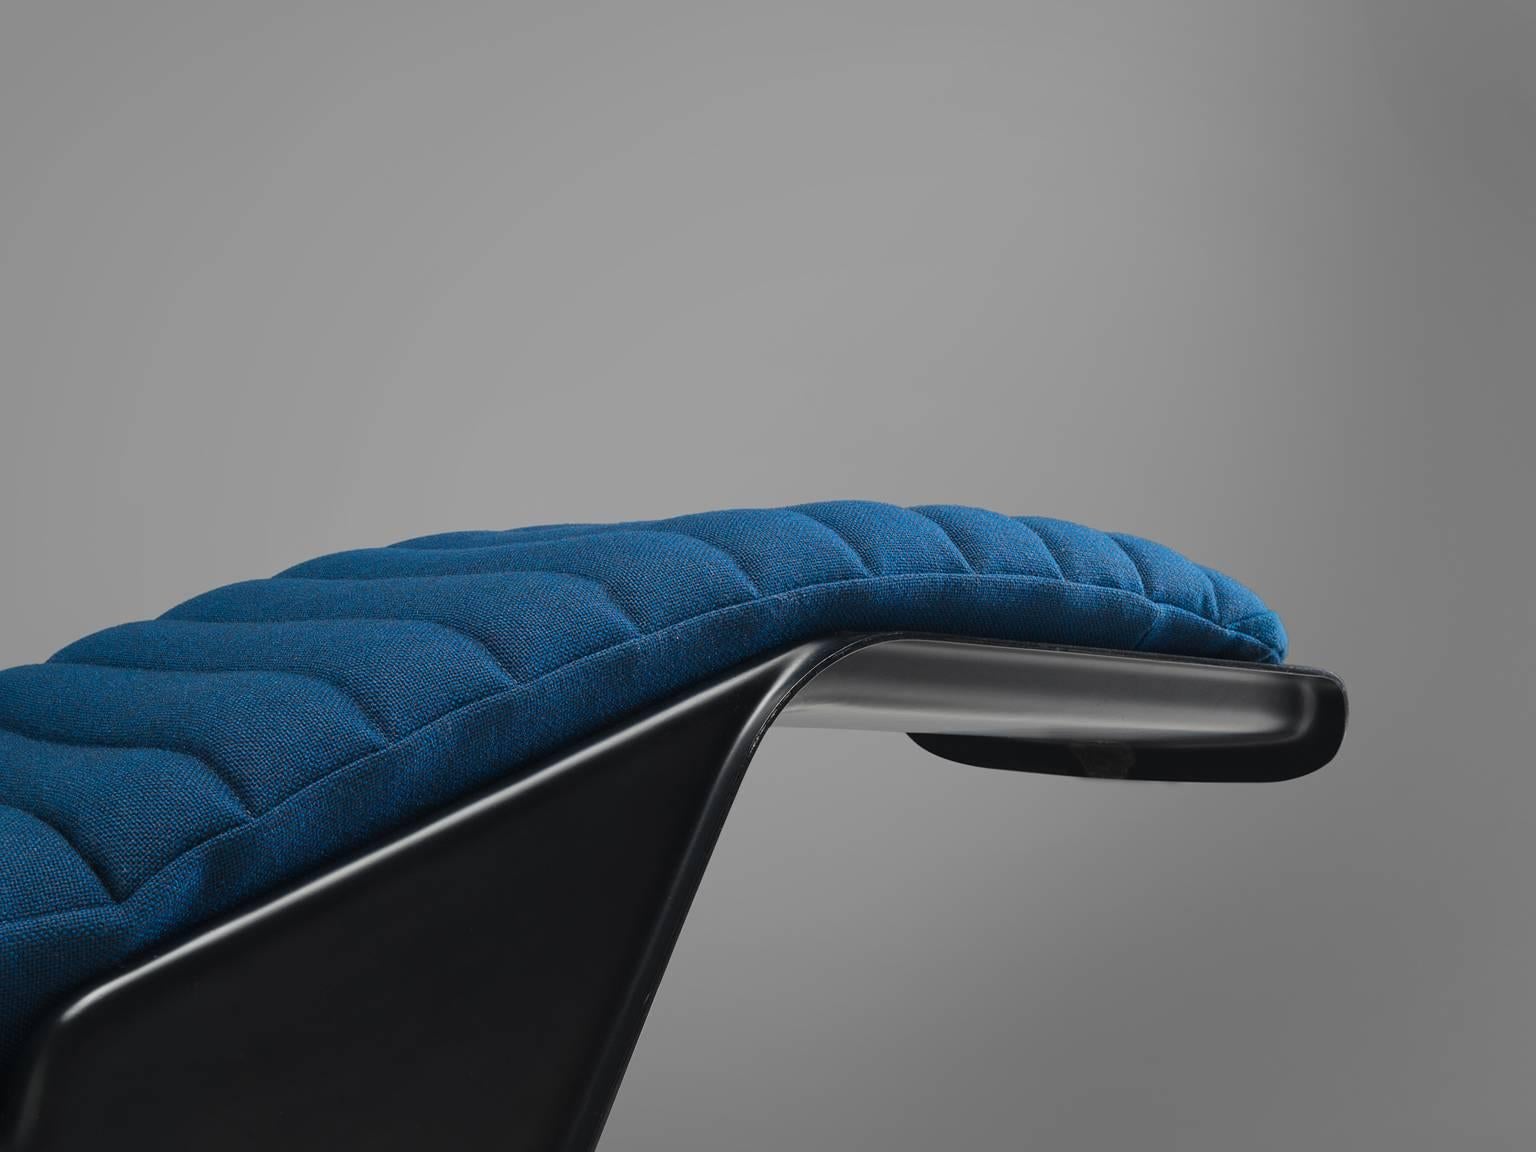 Fabric 'Serpentina' Rocking Lounge Chair by Burchard Vogtherr